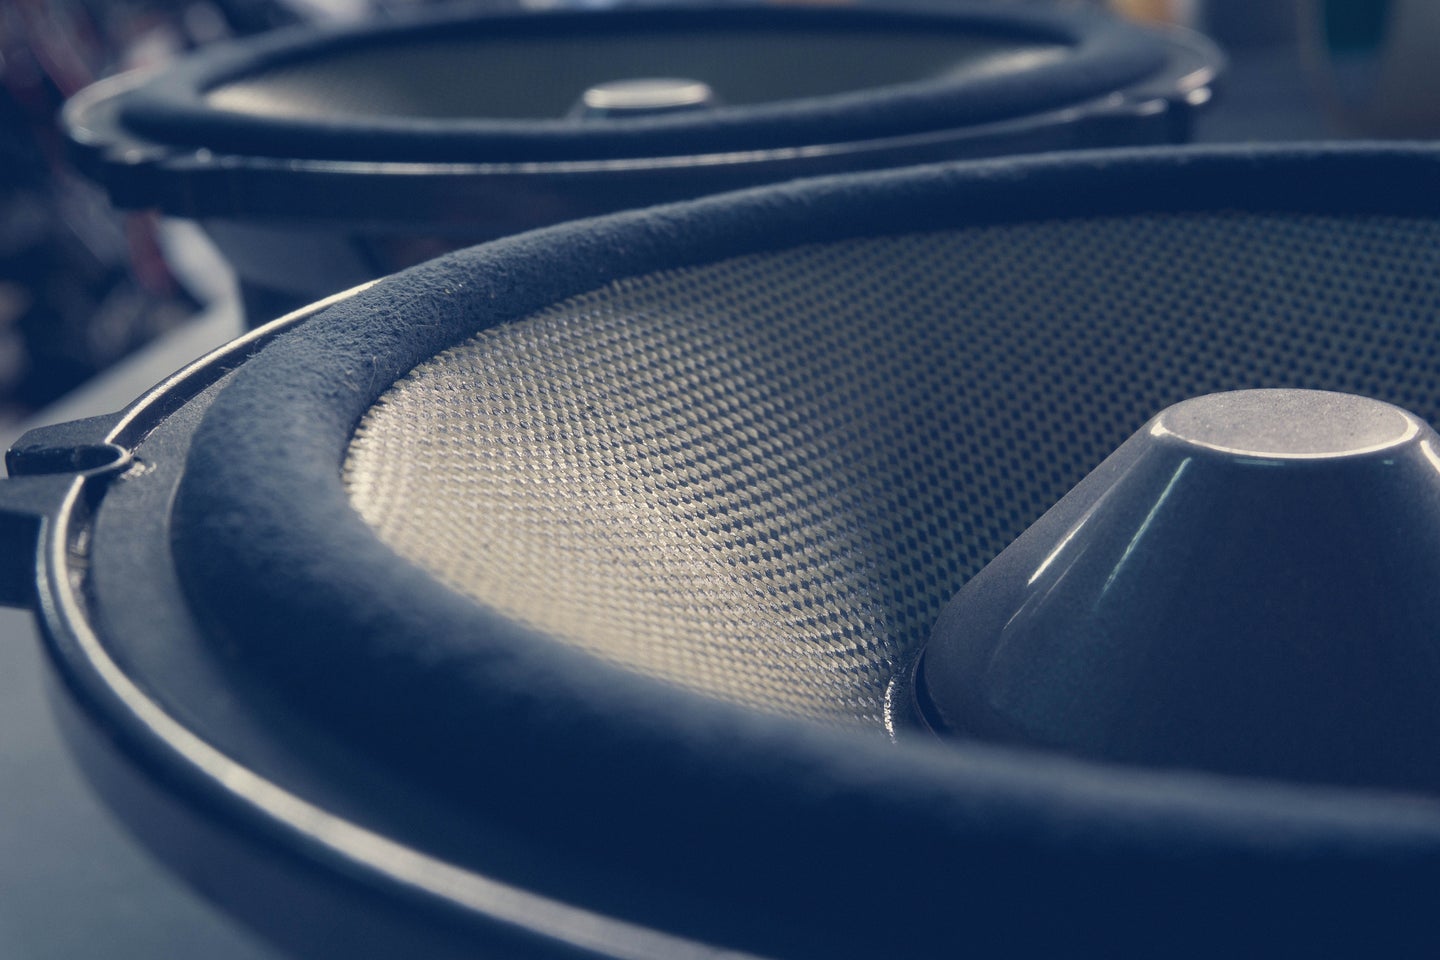 Best 12-Inch Subwoofers: All About That Bass